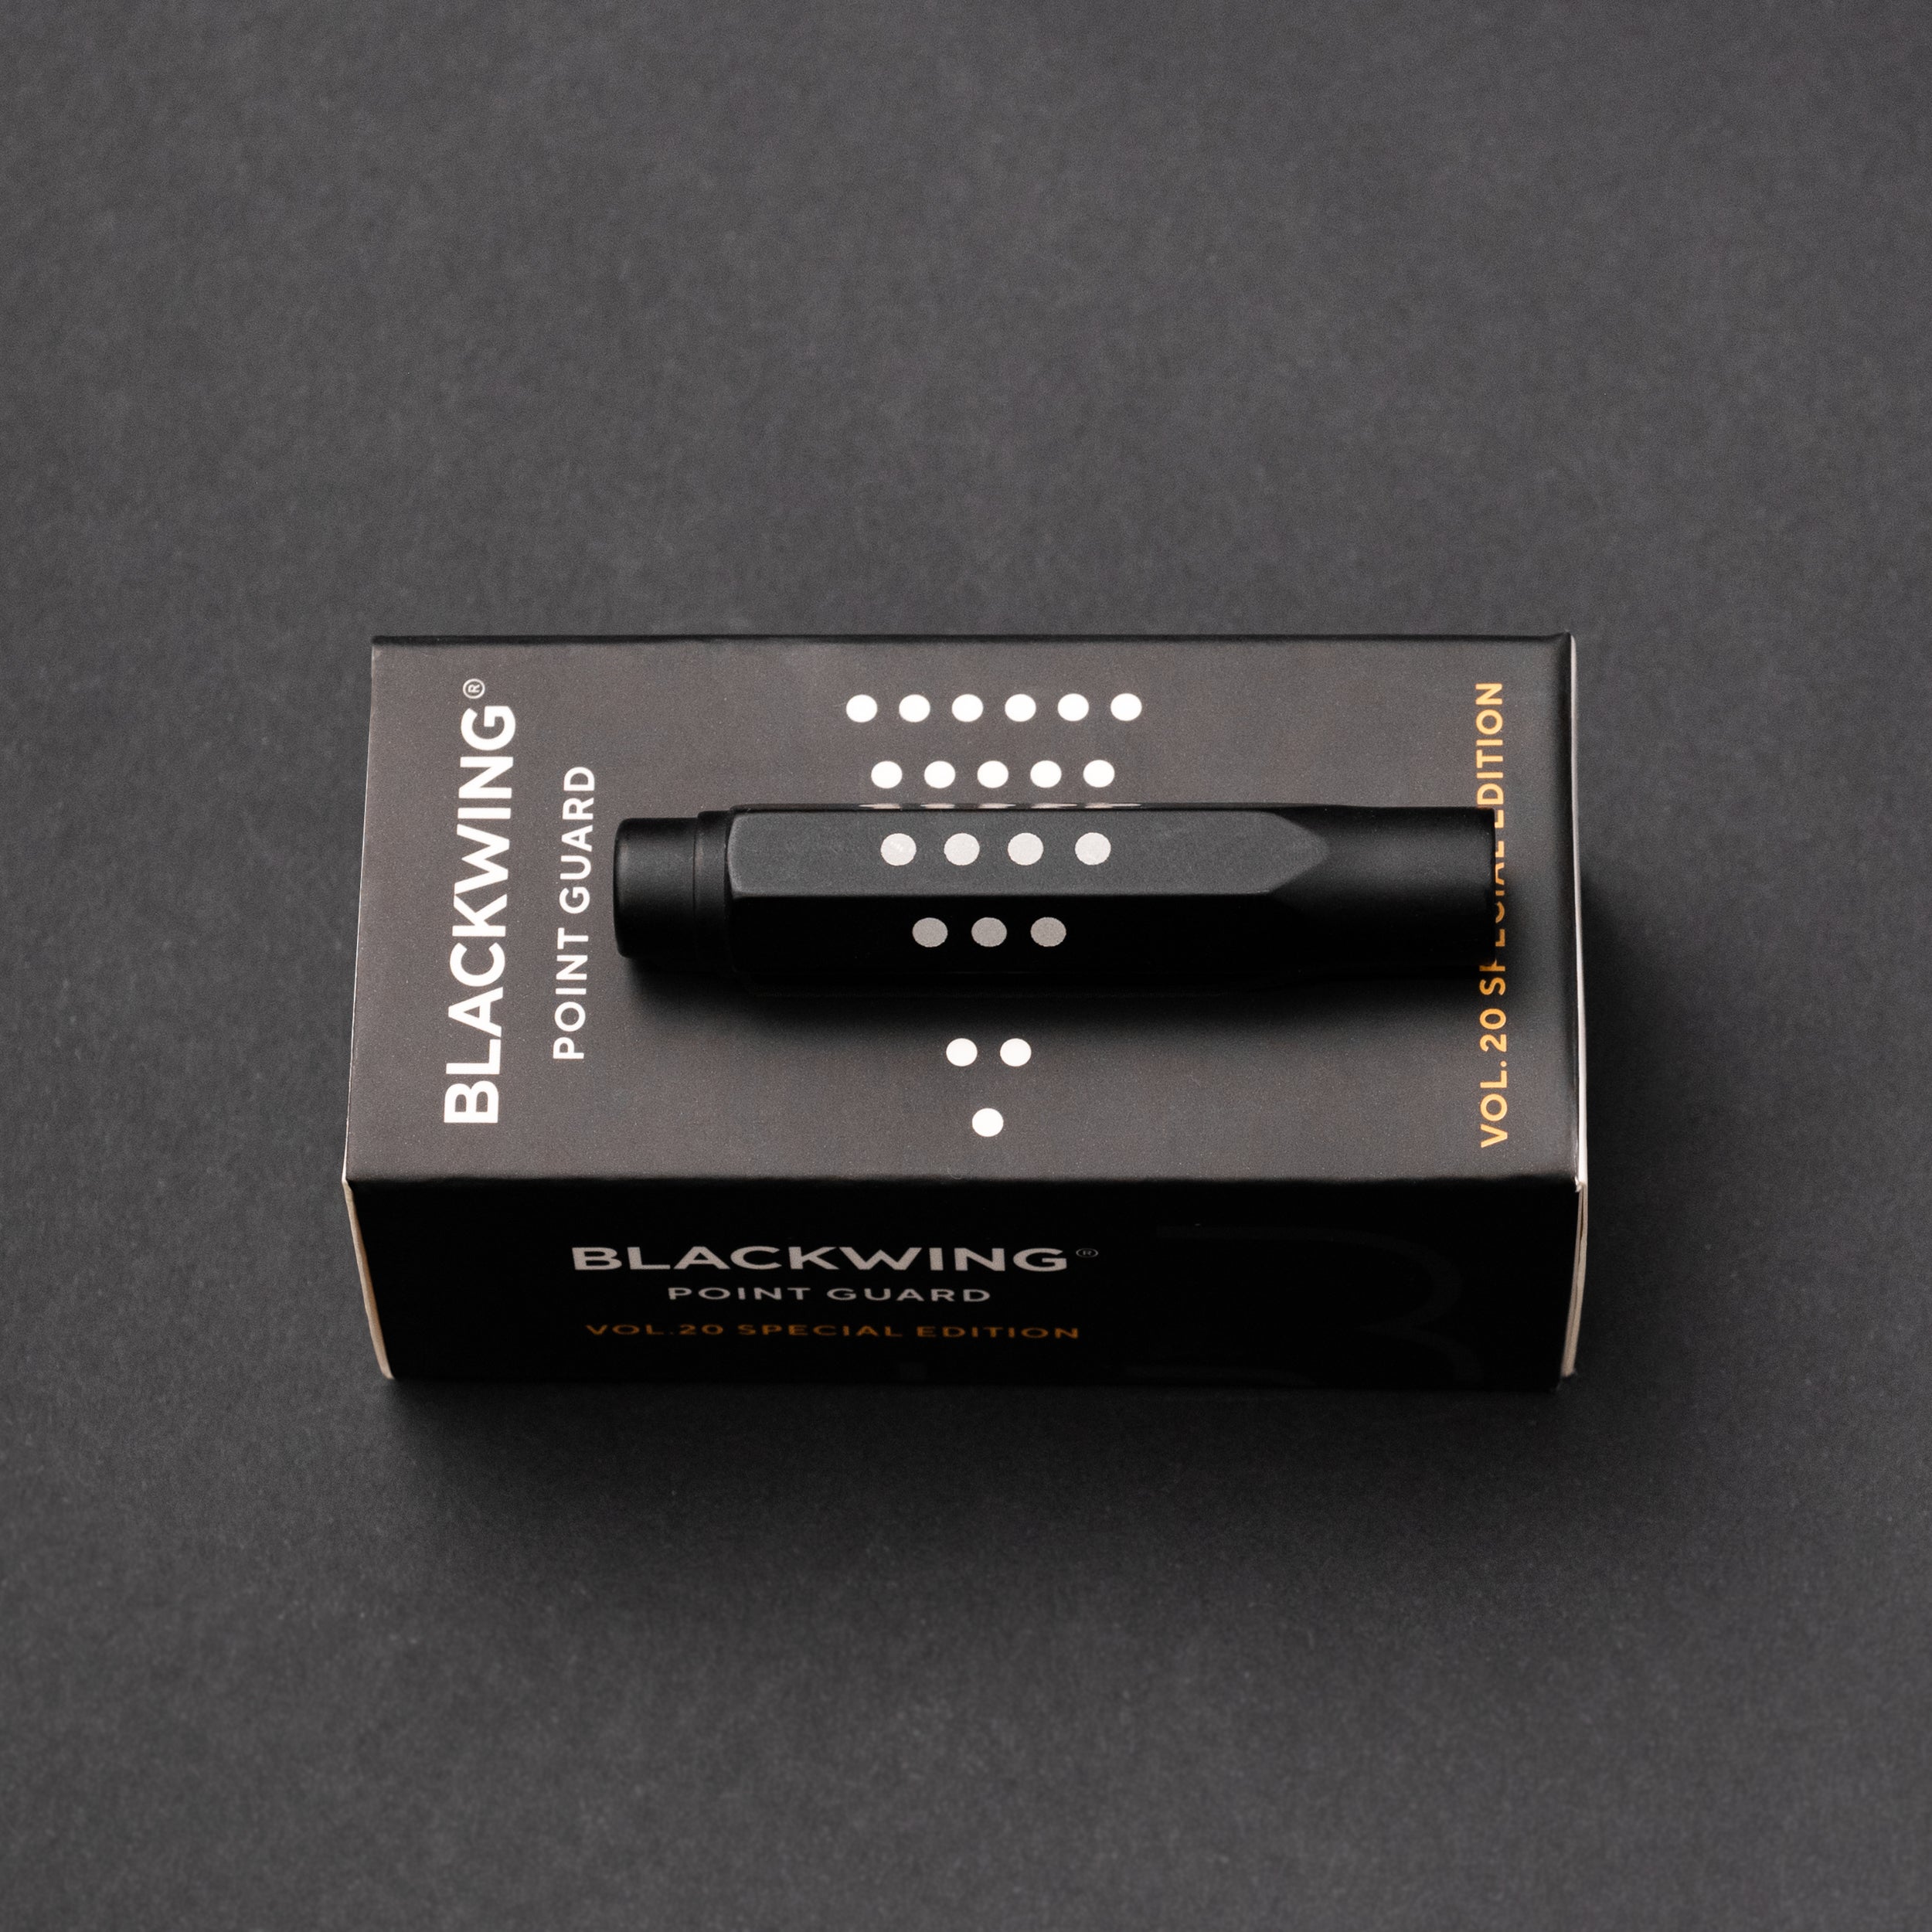 A Blackwing Volume 20 - D6 Point Guard in its packaging, displayed on a dark background.